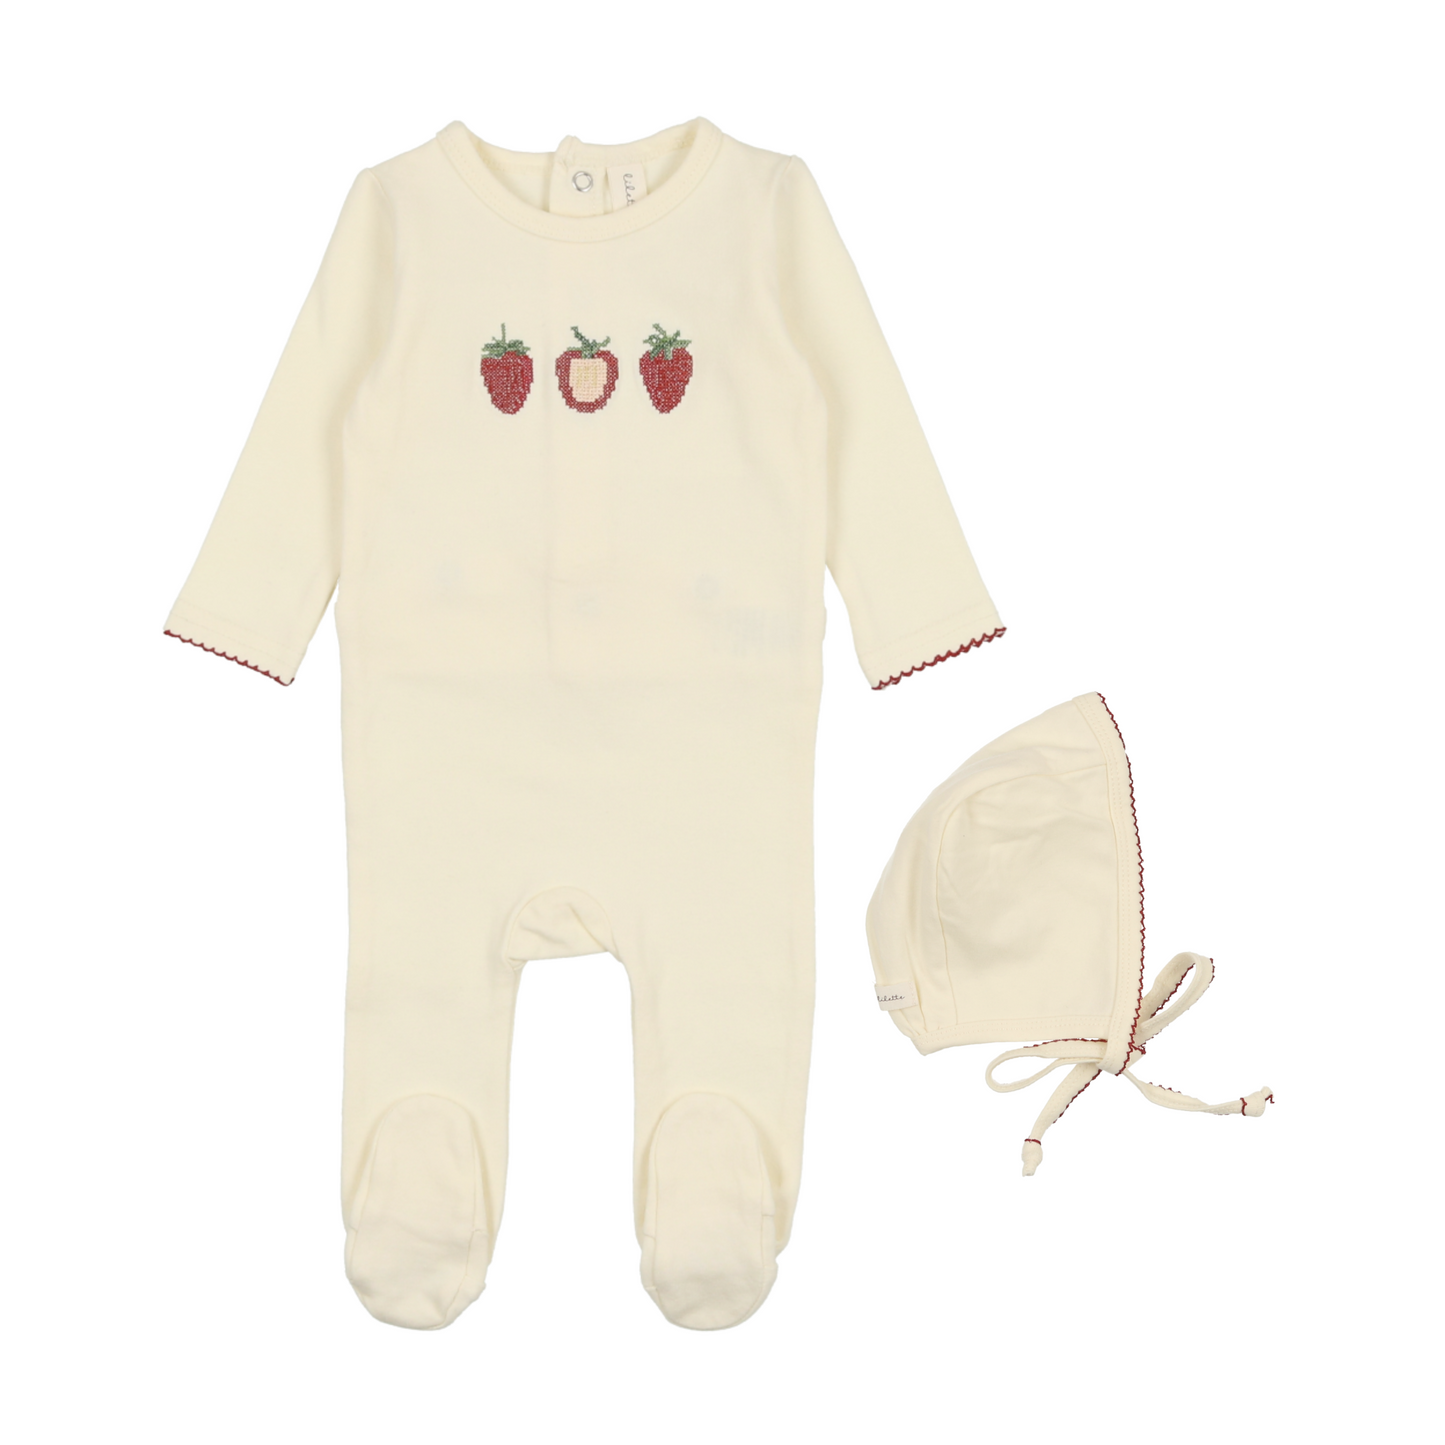 LILETTE IVORY/STRAWBERRY EMBROIDERED FRUIT FOOTIE SET